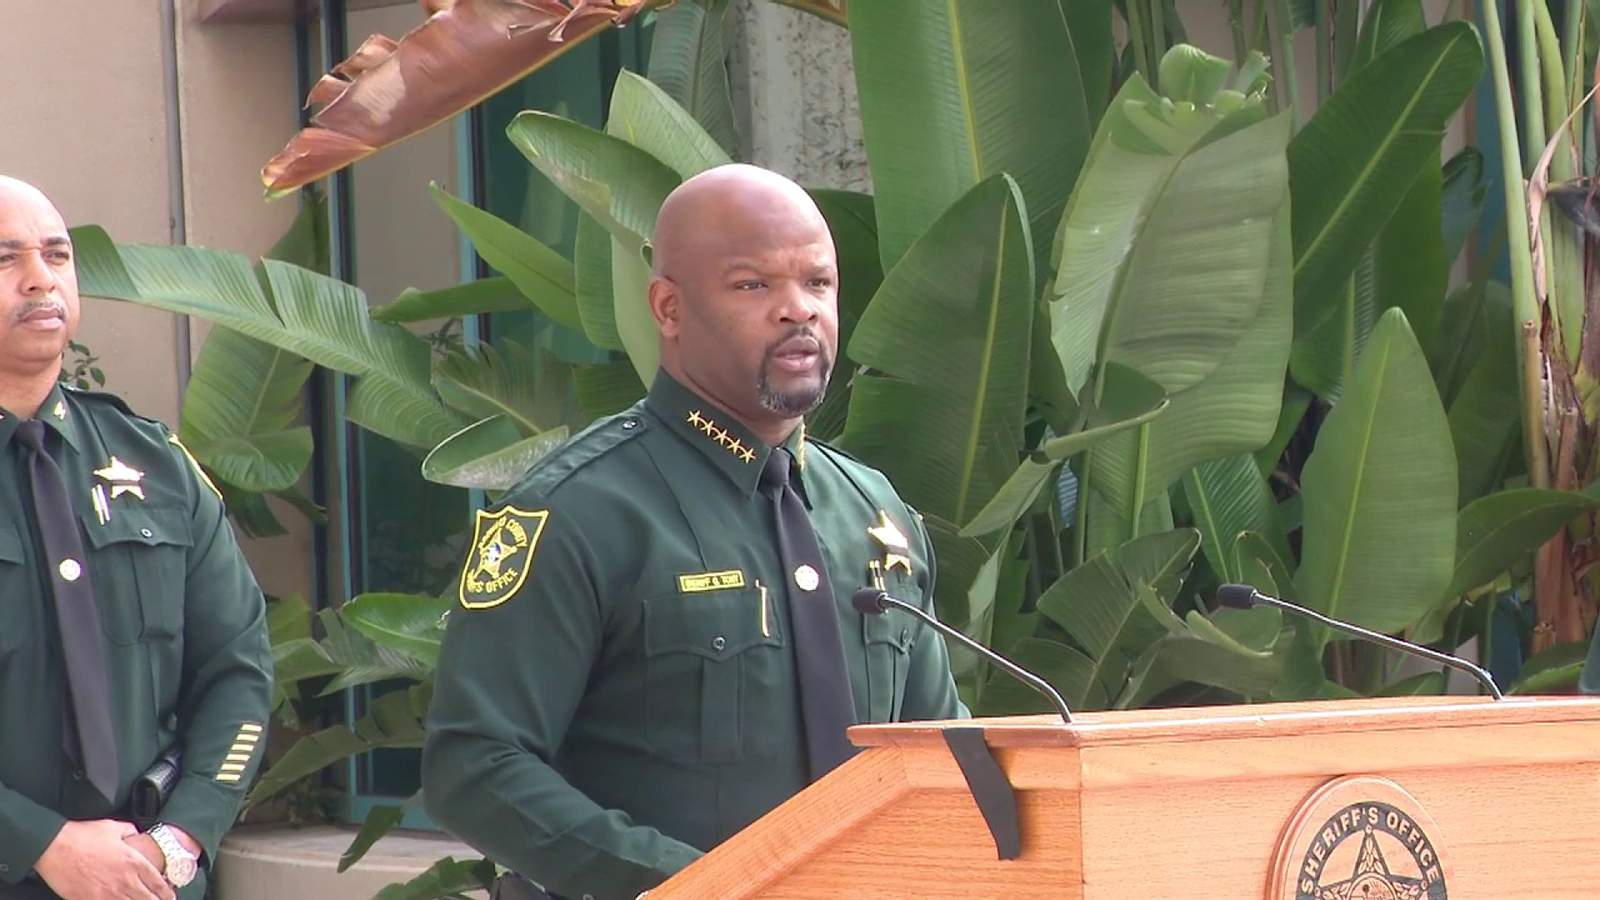 No-confidence vote on Sheriff Gregory Tony underway as union letter alleges lies and unfair firings